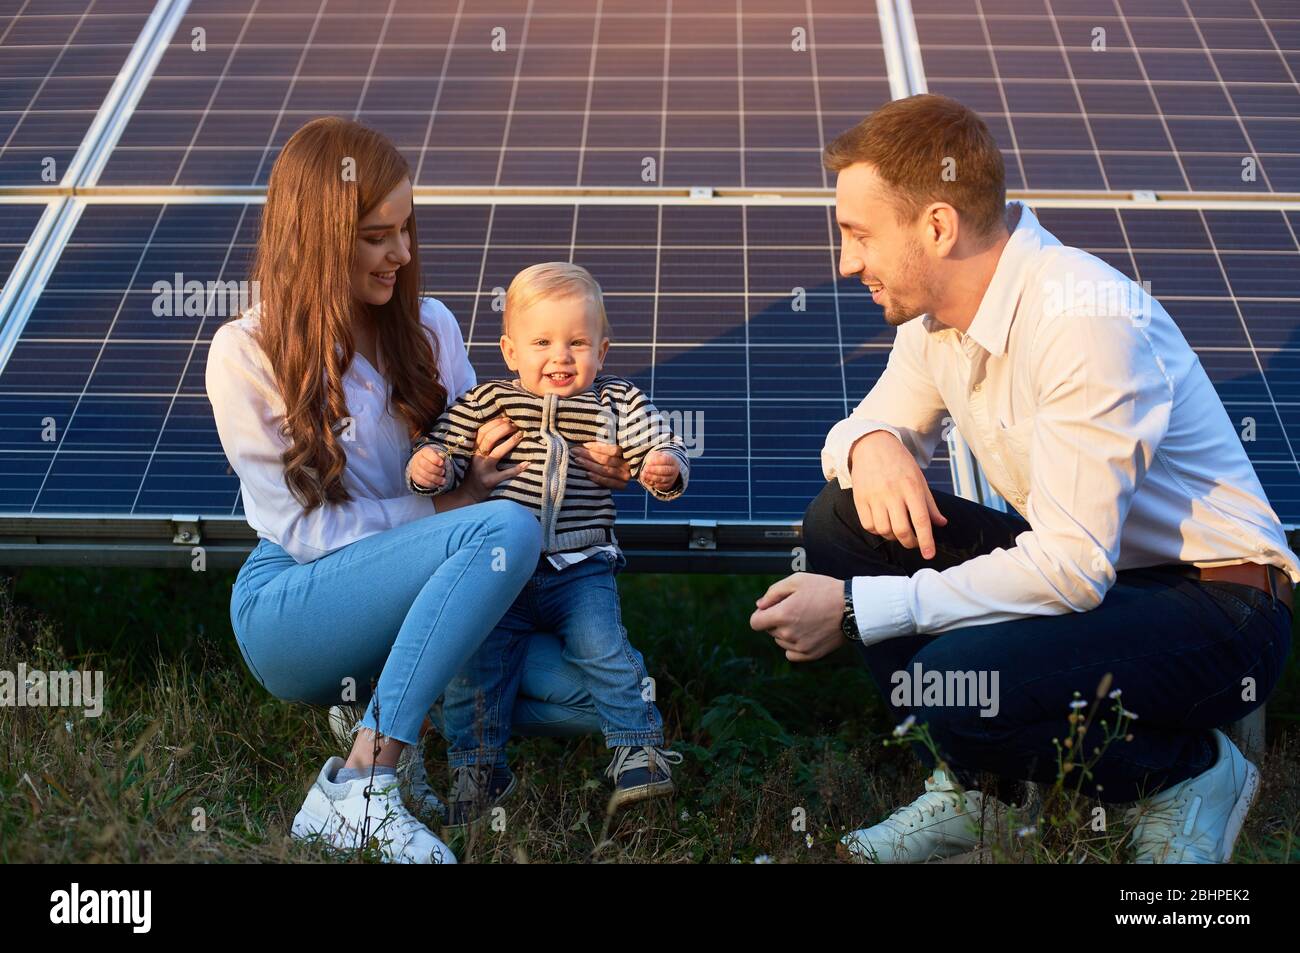 Young family of three is crouching near photovoltaic solar panel, little boy is looking at camera, parents looking at him, modern family concept Stock Photo